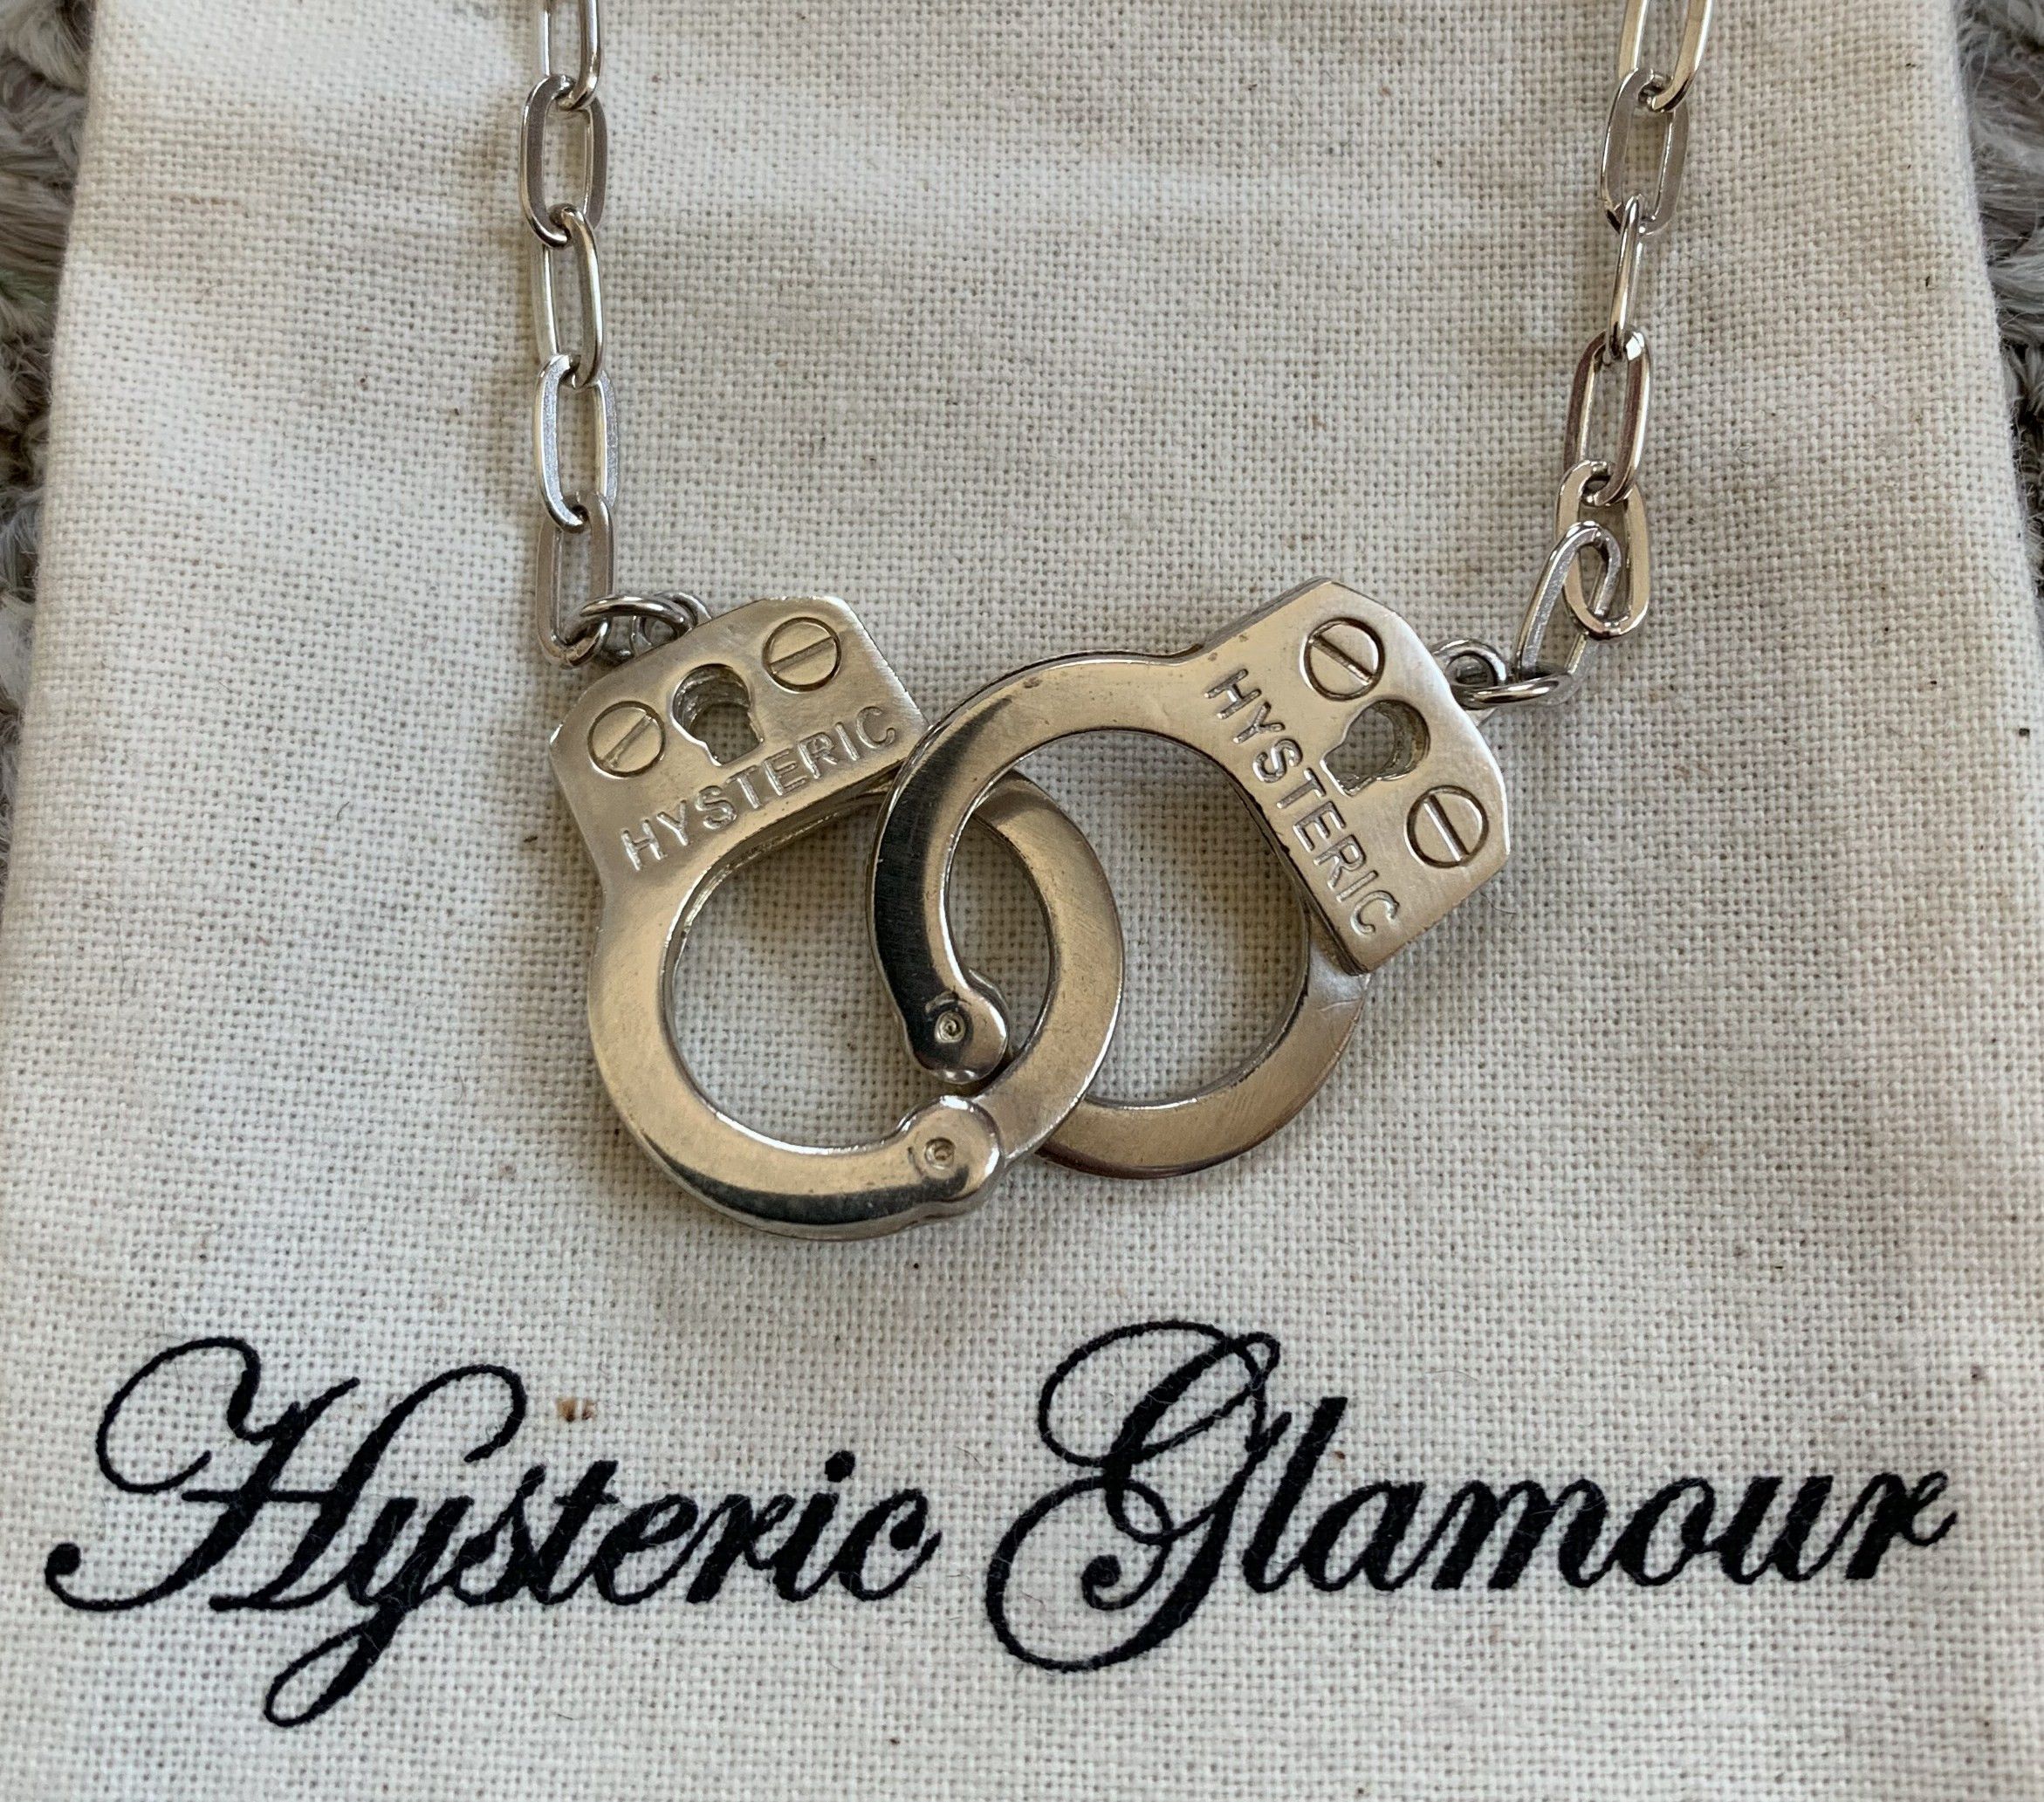 image of New Hysteric Glamour Sterling Silver Handcuffs Necklace, Men's